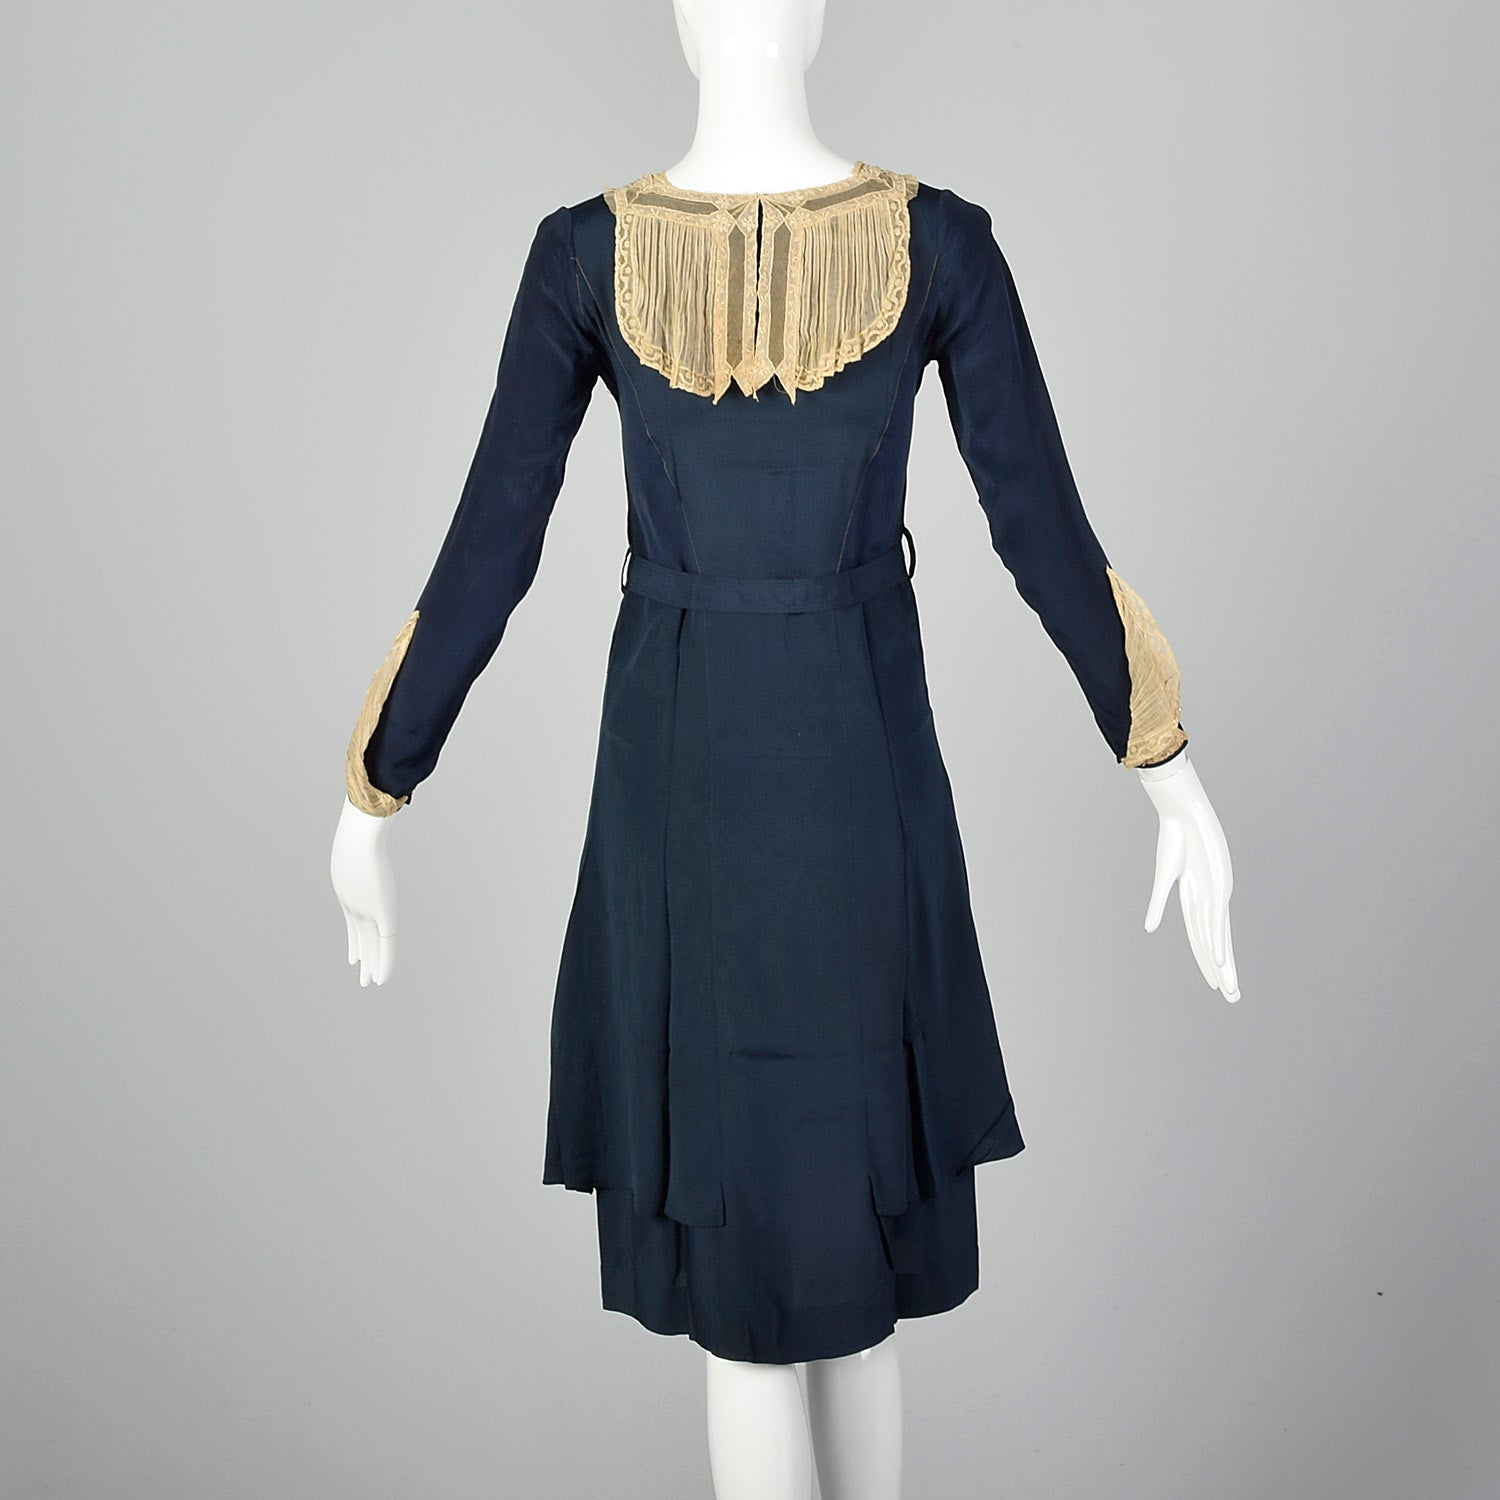 XS Frances Faire Collar 1930s & Frocks Navy Style – Lace Salvage Dress Blue